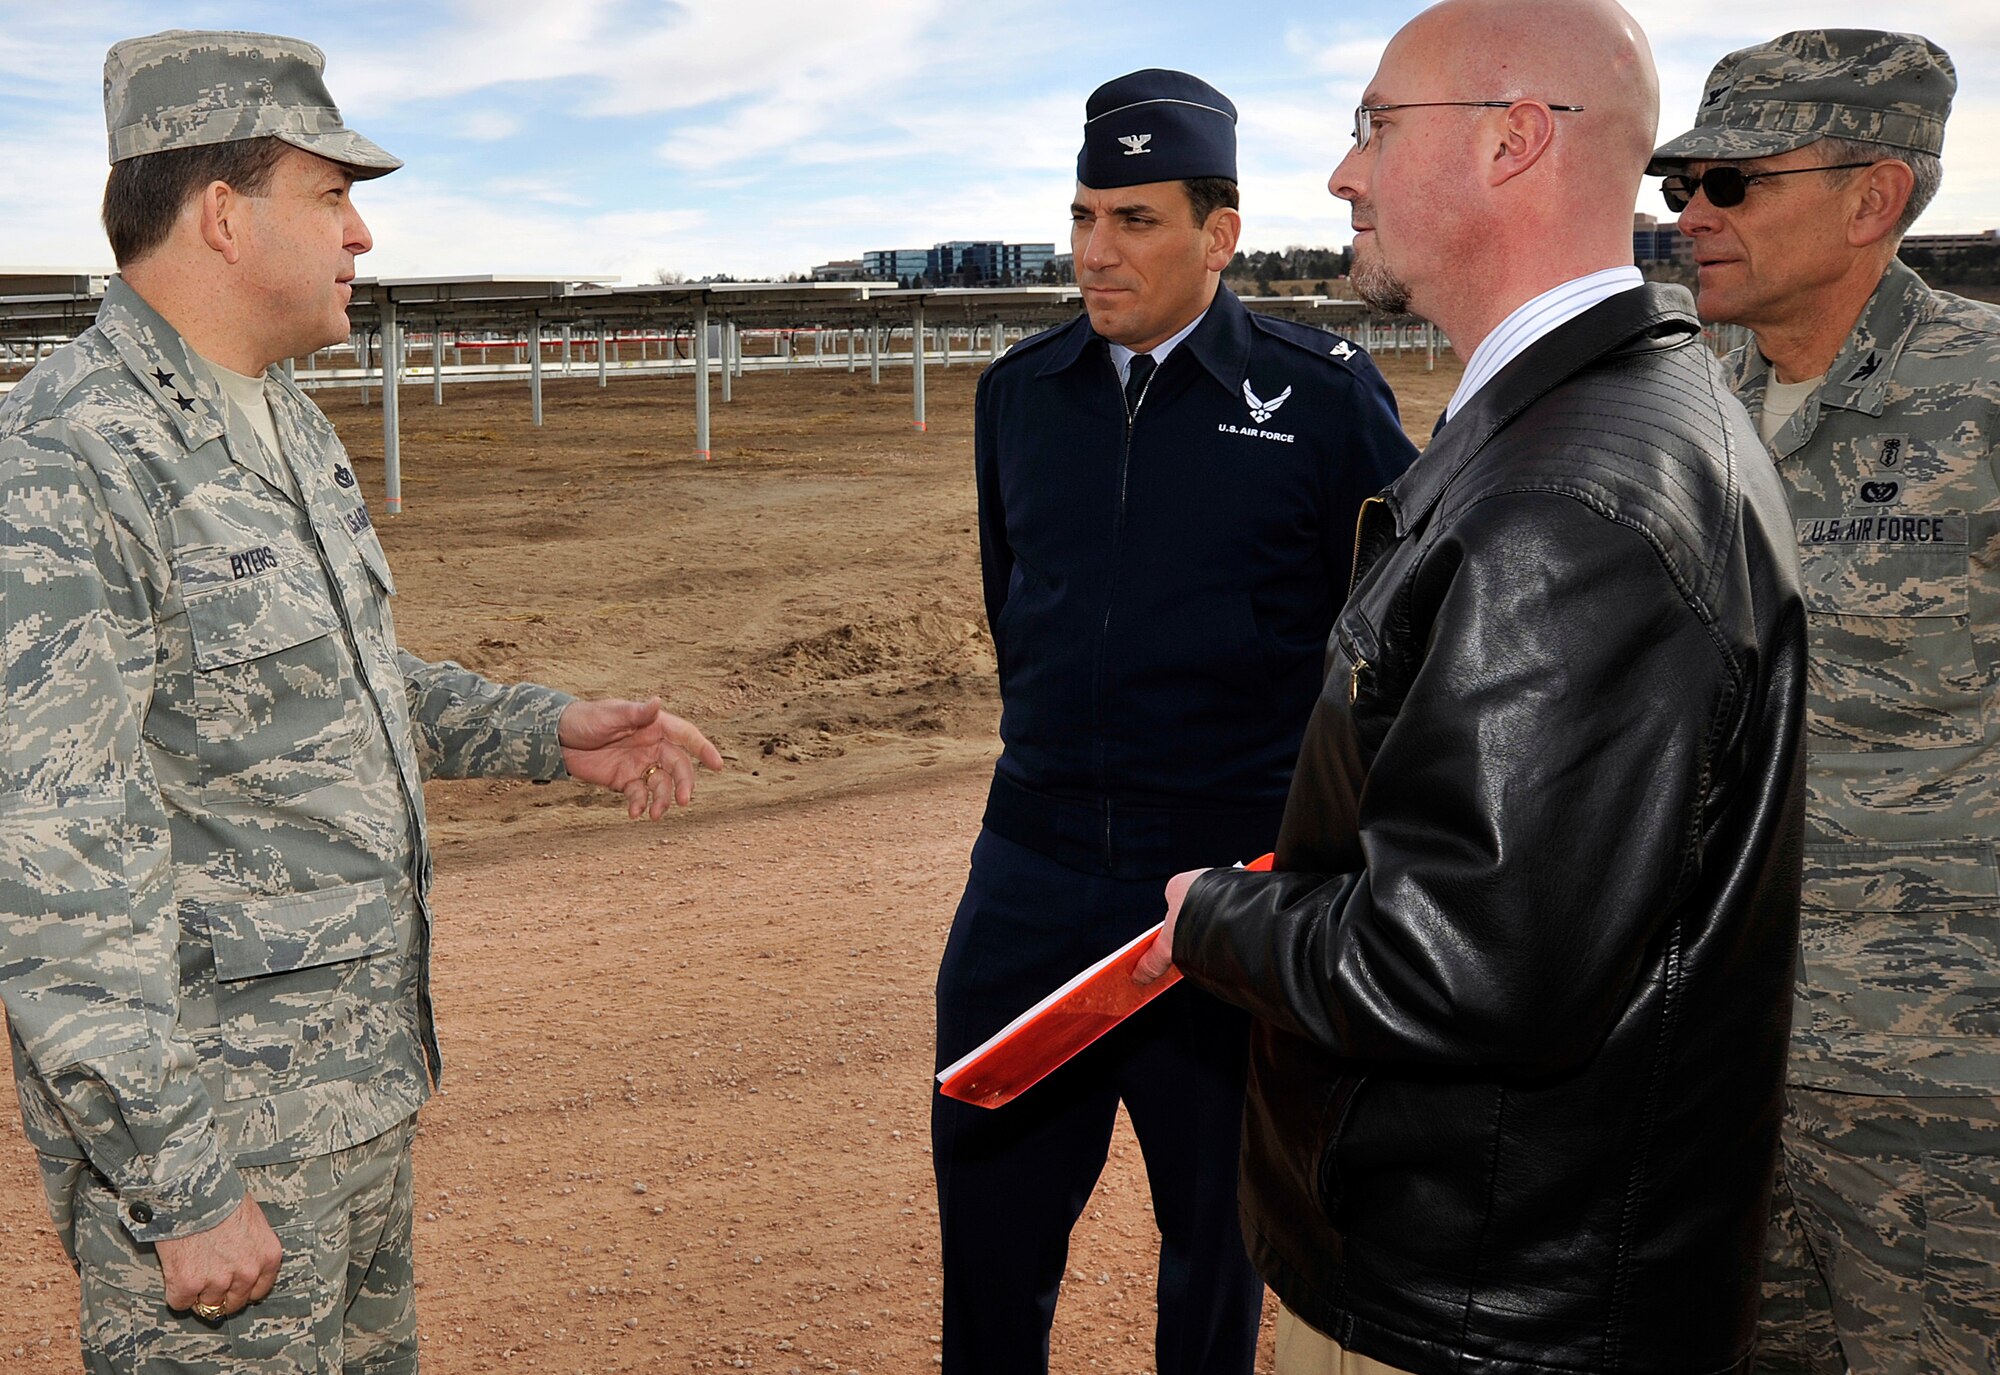 Maj. Gen. Timothy Byers speaks with Col. Rick LoCastro, Russ Hume and Col. Gregory Seely during a visit to the Air Force Academy's solar array March 4, 2011. The array is scheduled to generate its first megawatt of power in March and ramp up to its full 6MW capacity by the end of April. General Byers is the Air Force Civil Engineer and graduate of the University of Kentucky. Colonel LoCastro is the Academy's 10th Air Base Wing commander. Colonel Seely is the director of Installation and Mission Support, and Mr. Hume is an engineer with the A7 directorate. (U.S. Air Force photo/Bill Evans)